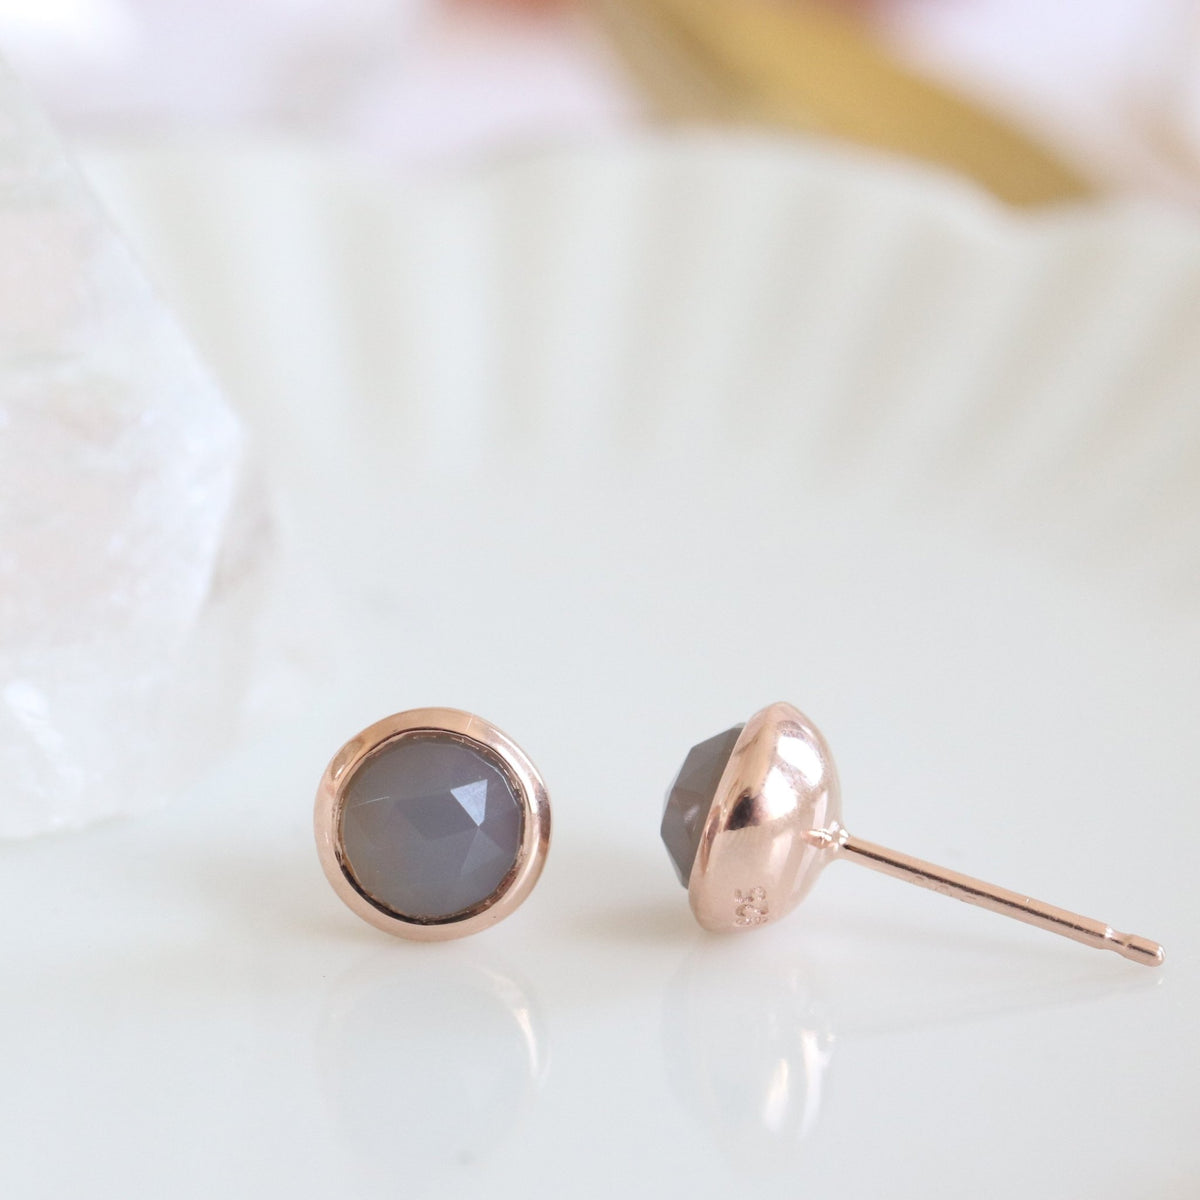 DAINTY LEGACY STUDS - GREY MOONSTONE &amp; ROSE GOLD - SO PRETTY CARA COTTER